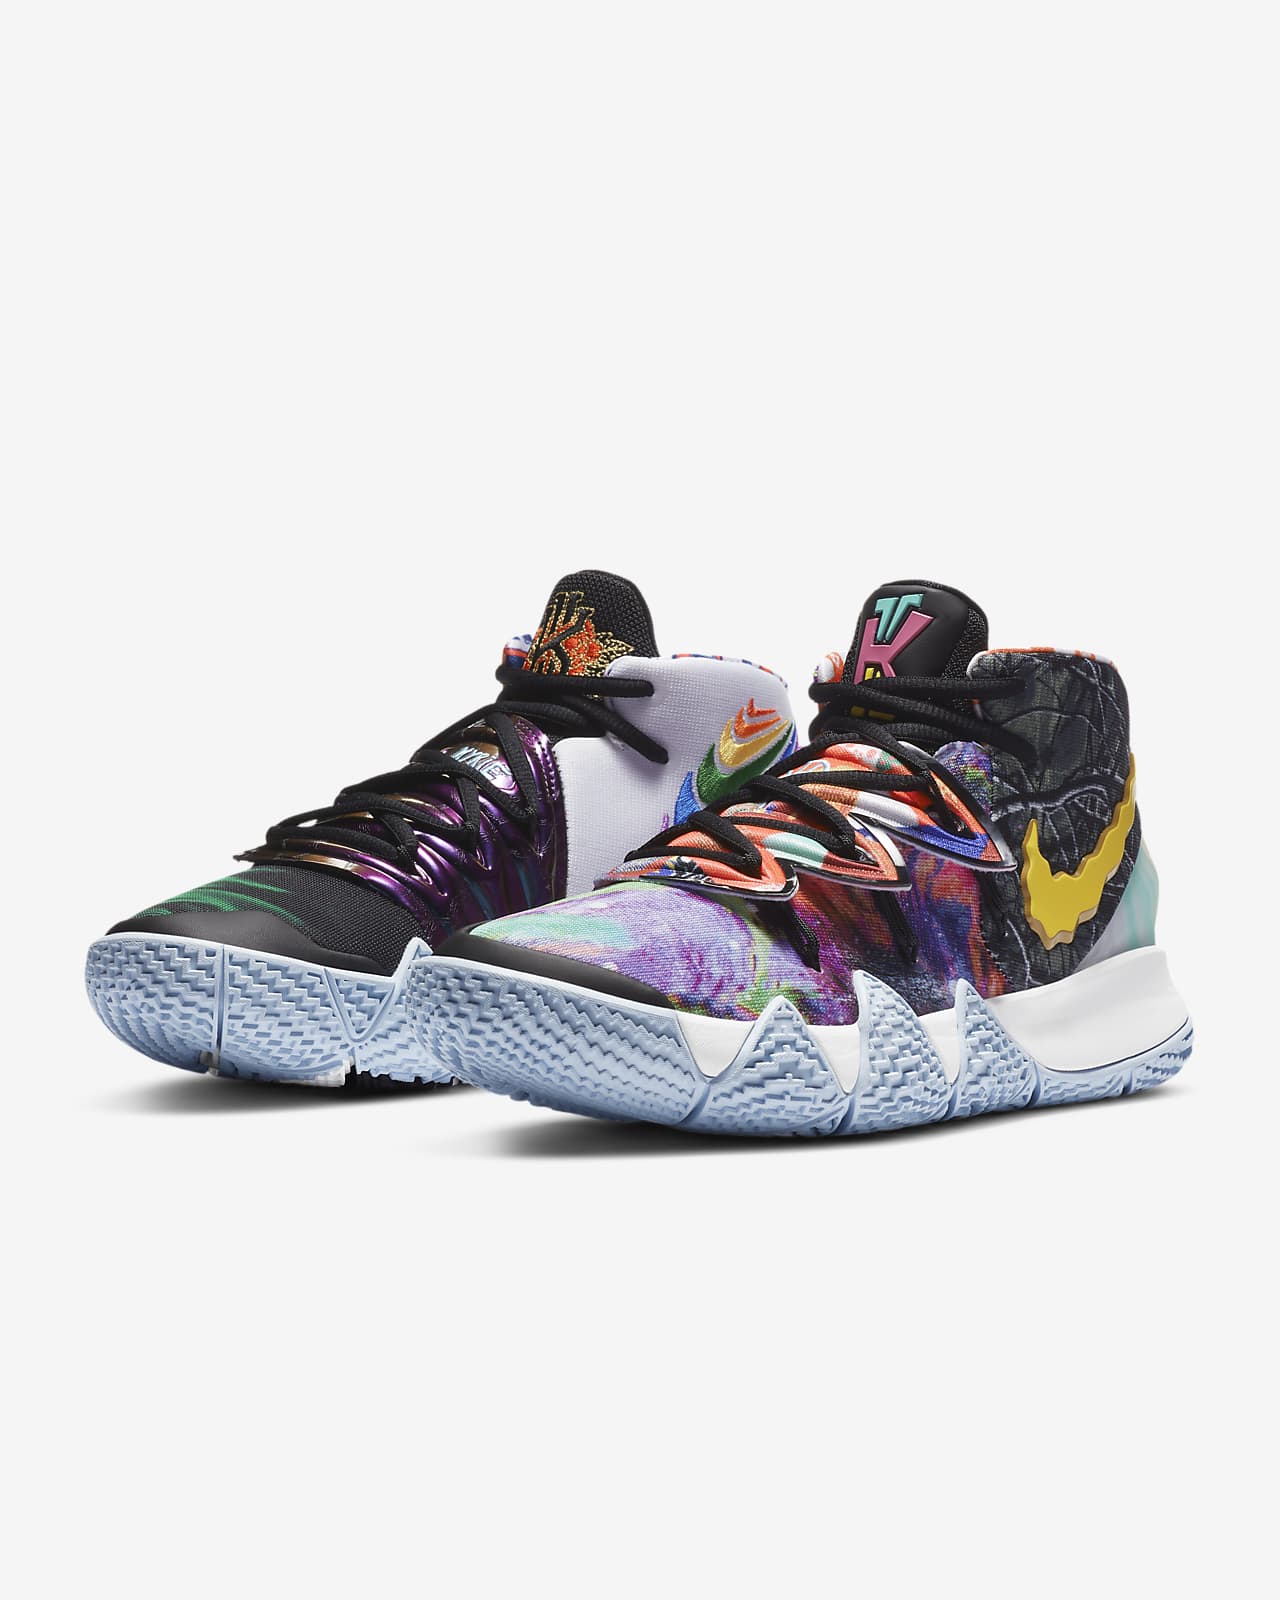 nike kybrid s2 ep - Shop The Best Discounts Online OFF 73%